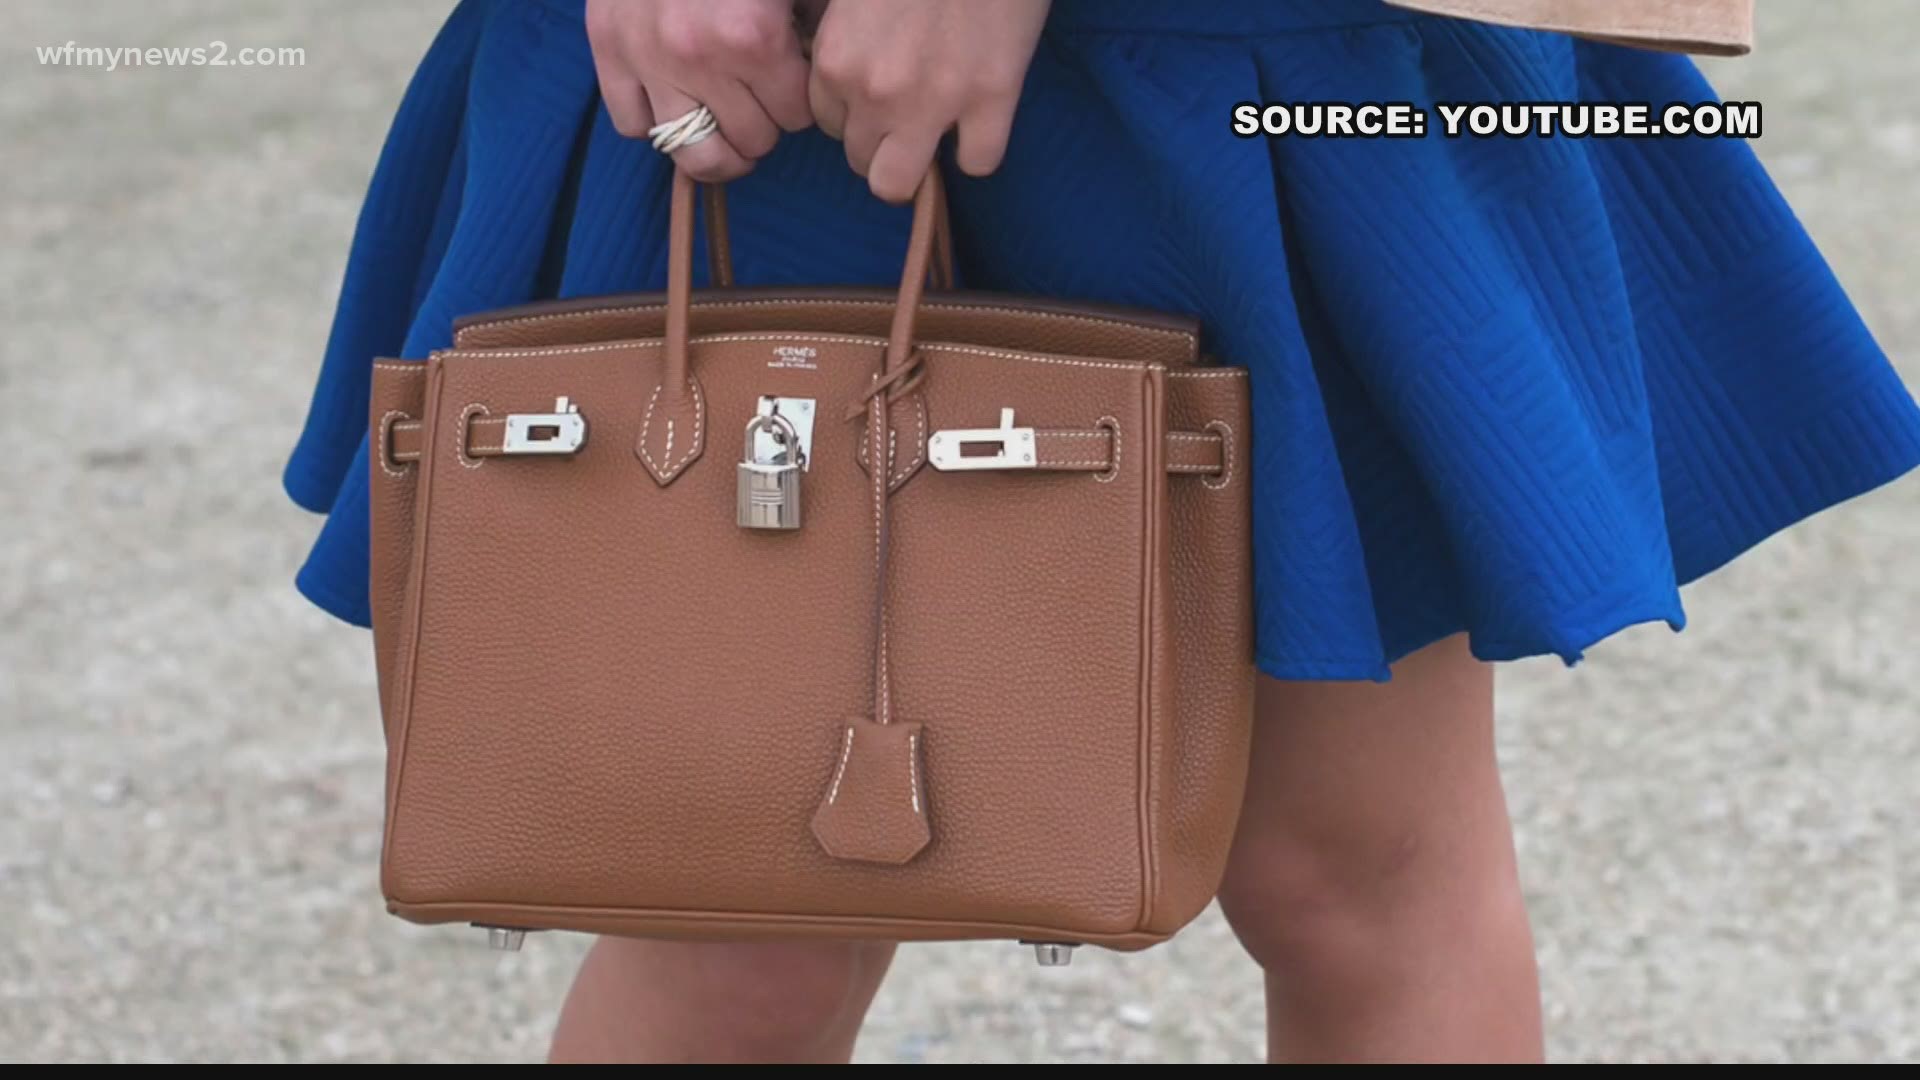 Experts said getting a good deal on a designer handbag could mean an influx of cash in your wallet.